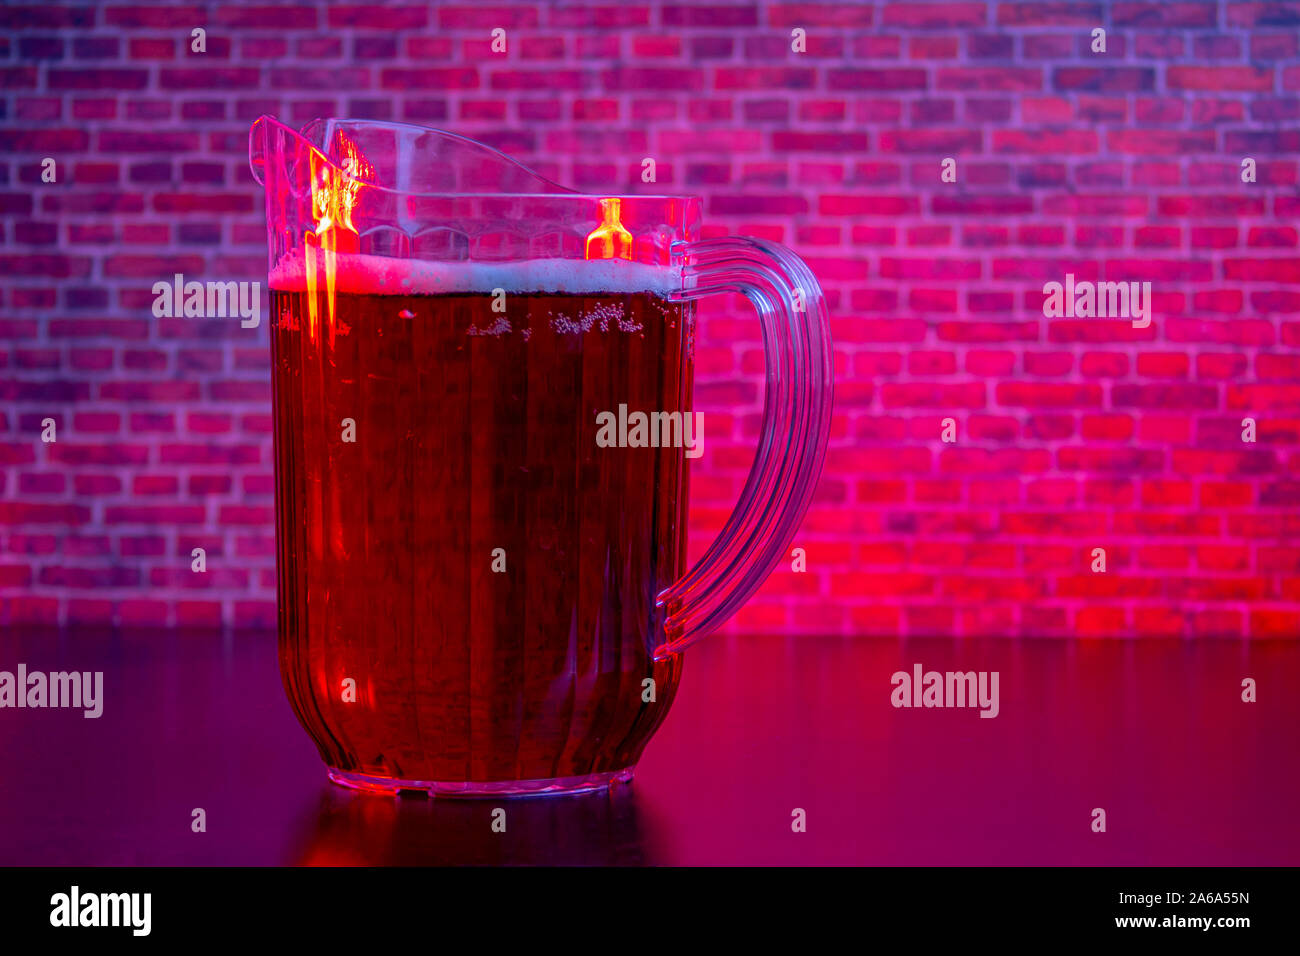 Jug of beer on a red lighting with brick background Stock Photo